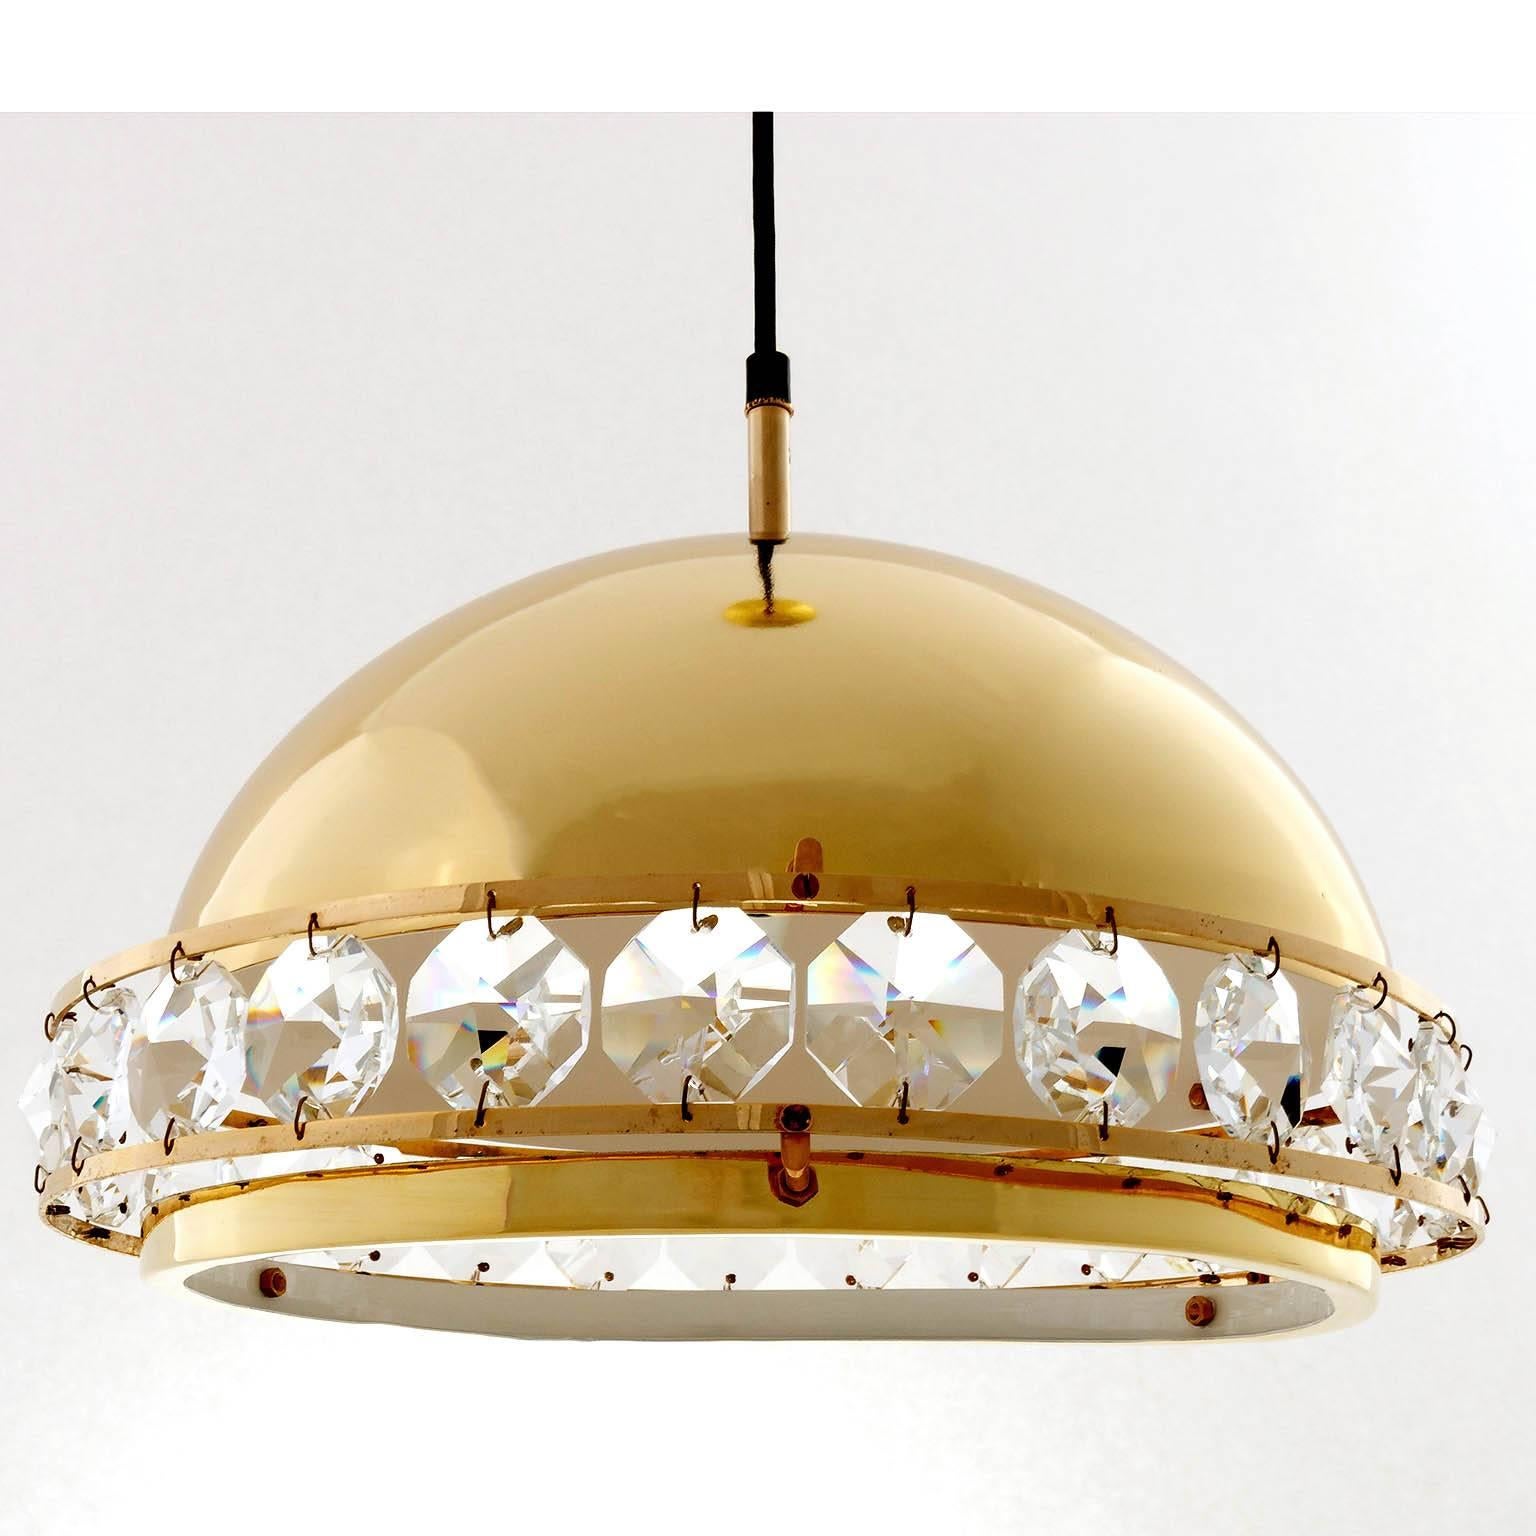 A polished brass dome hanging lamp with cut crystal glass very likely manufactured by Austrian light maker Rupert Nikoll, Vienna, in Mid-Century, circa 1960.
The light has three sockets for small screw base bulbs or LEDs.
Measure: The height of the